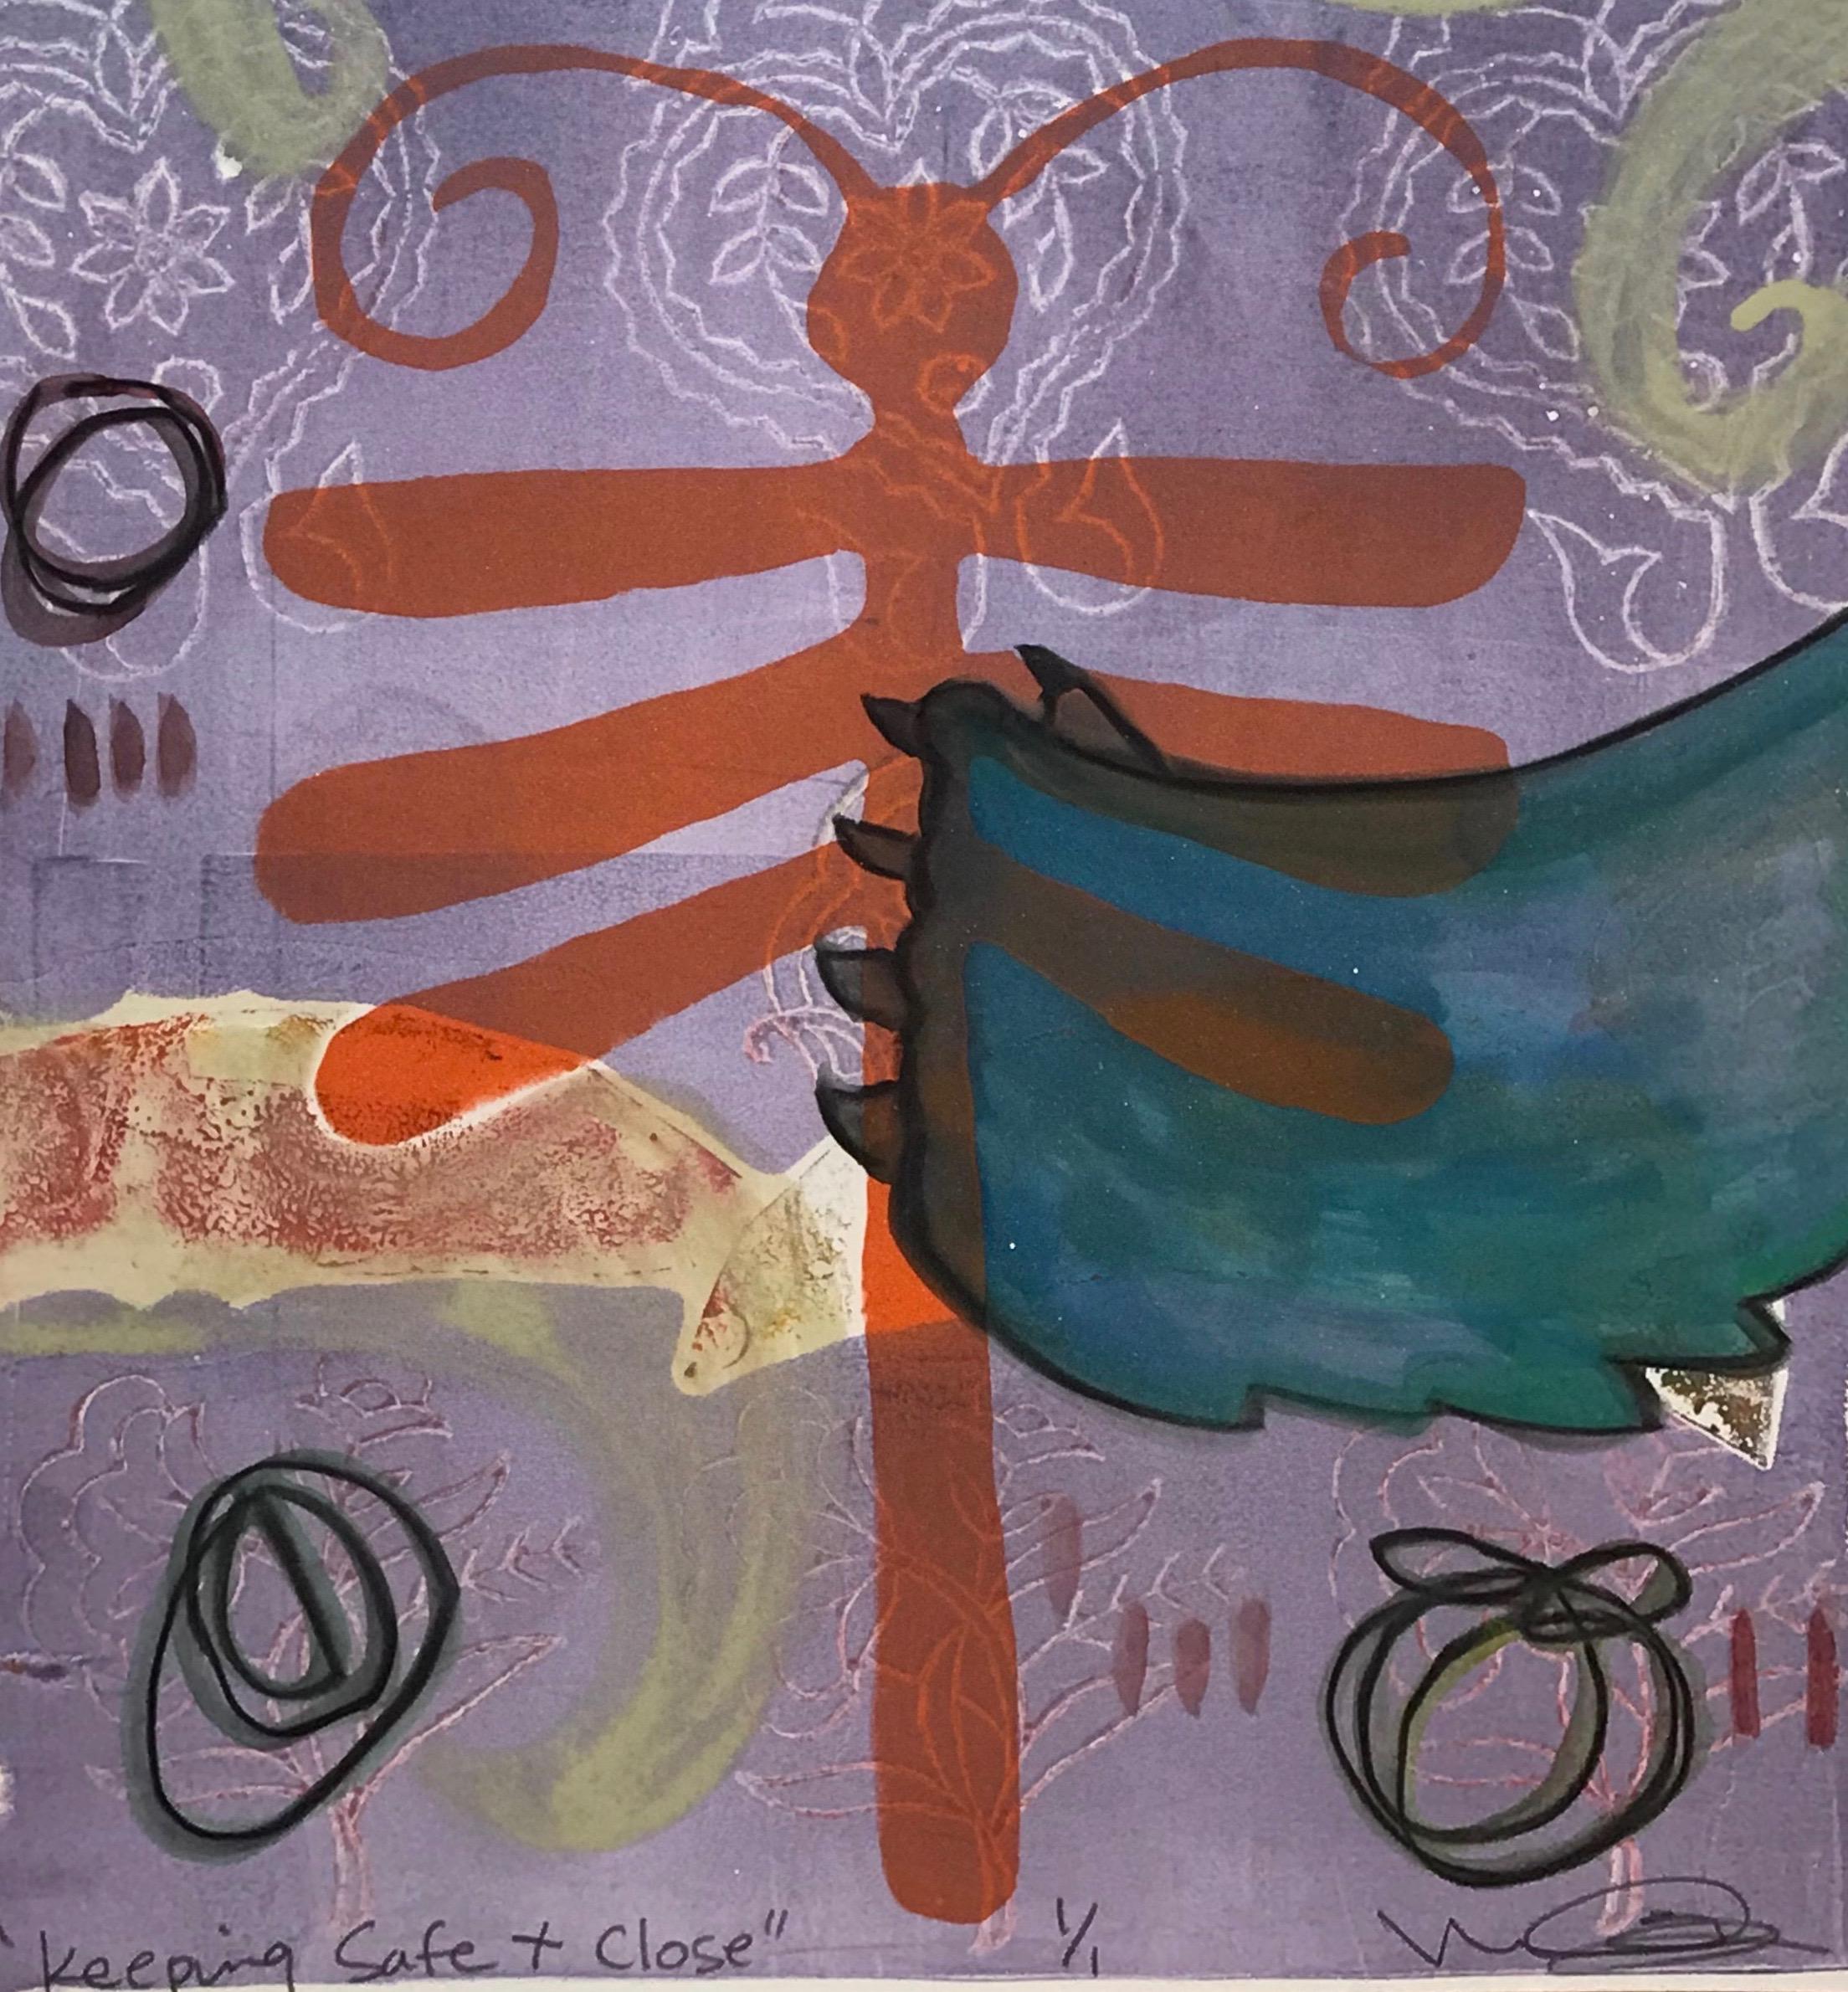 Keeping Safe + Close, mixed media monotype on paper. purple, orange, dragonfly - Print by Melanie Yazzie